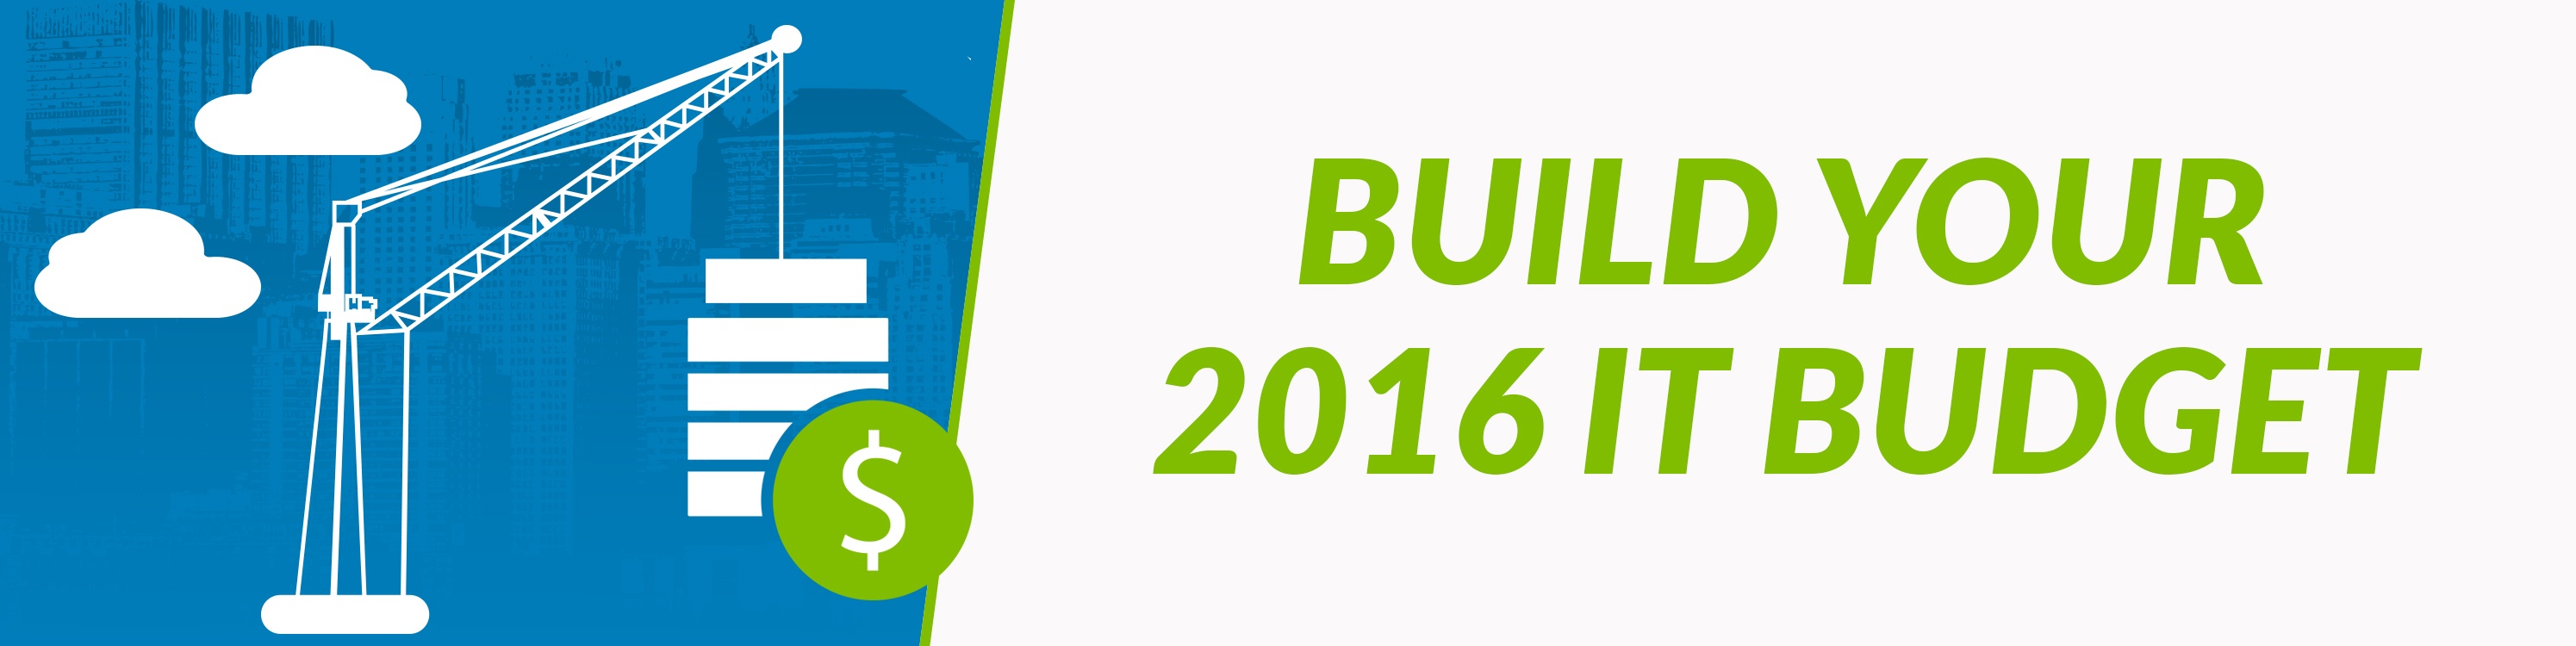 Build Your 2016 IT Budget 